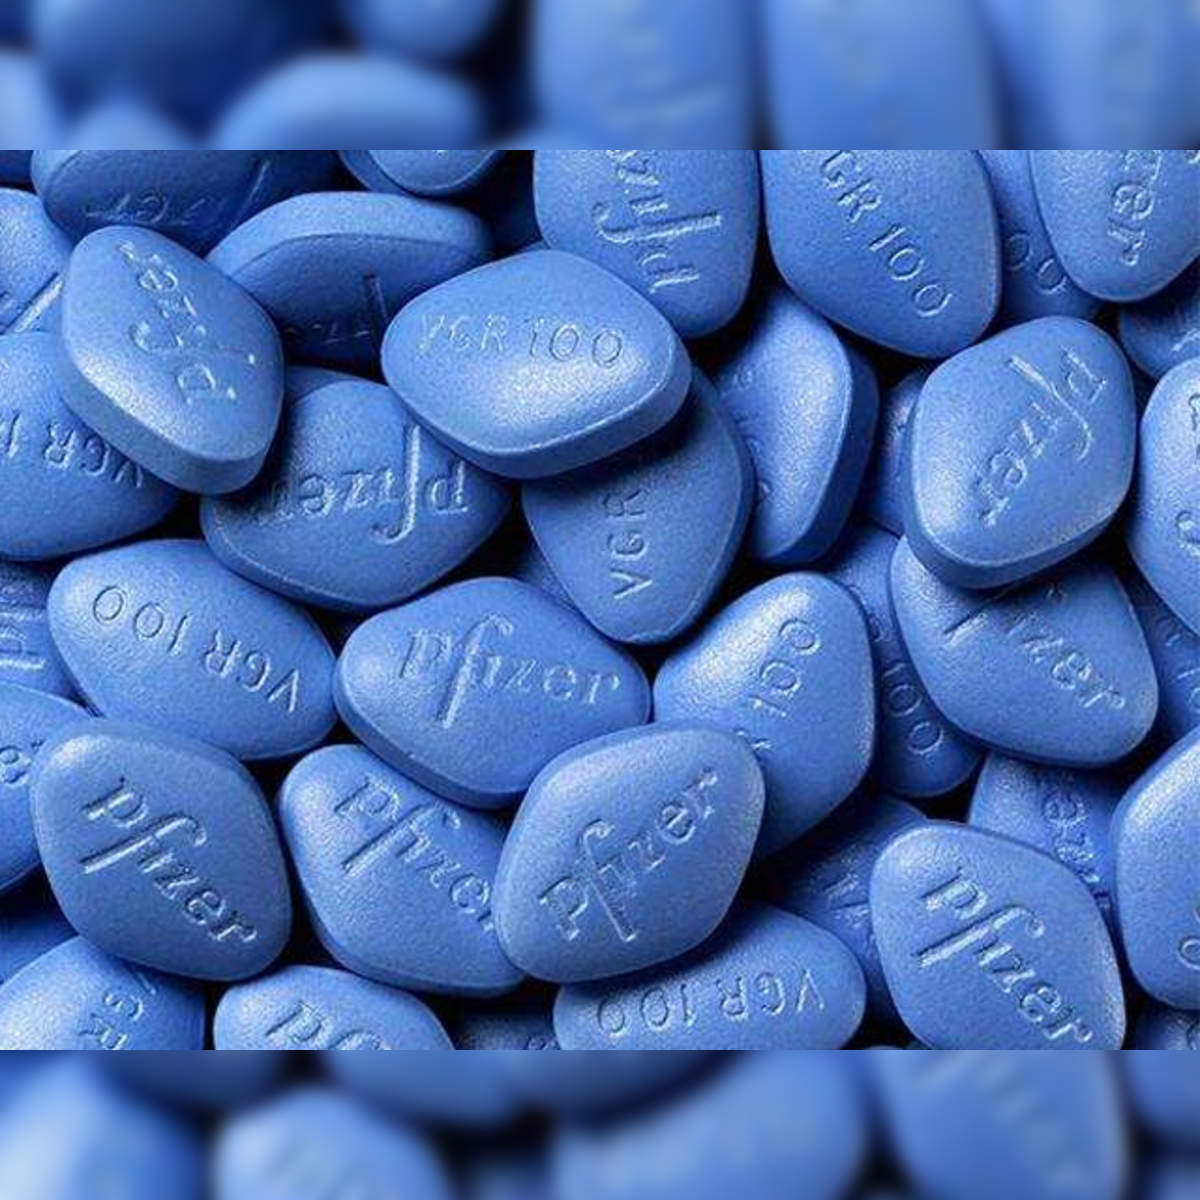 Viagra: Set to conquer US, Indian 'Viagras' may give Pfizer a hard